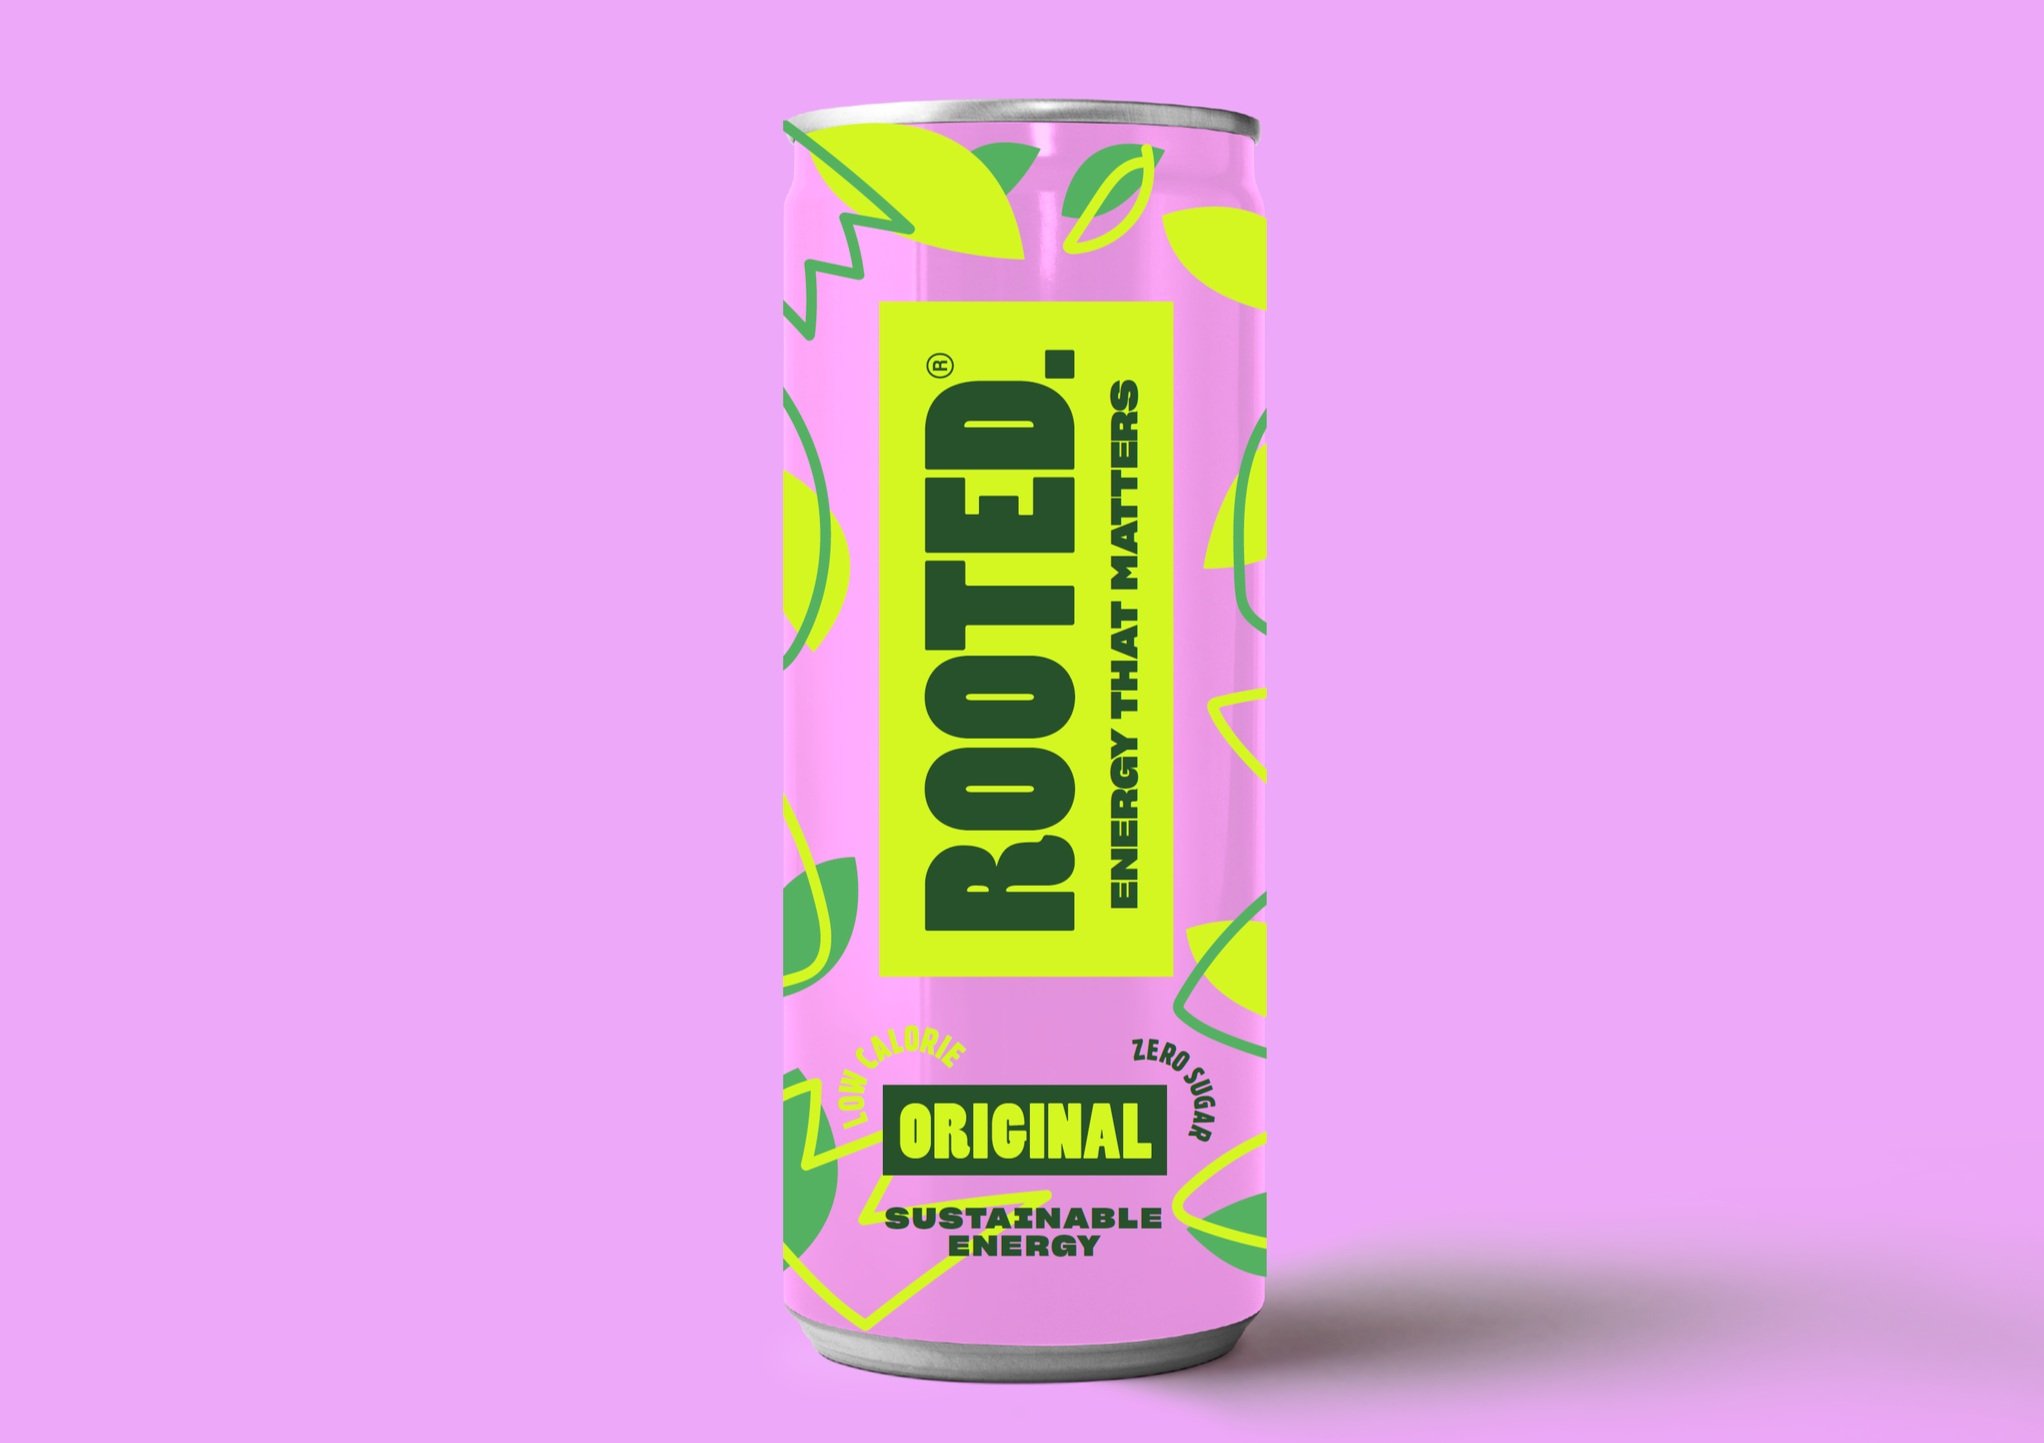 Food and drink packaging designer. A can of Rooted natural energy drink